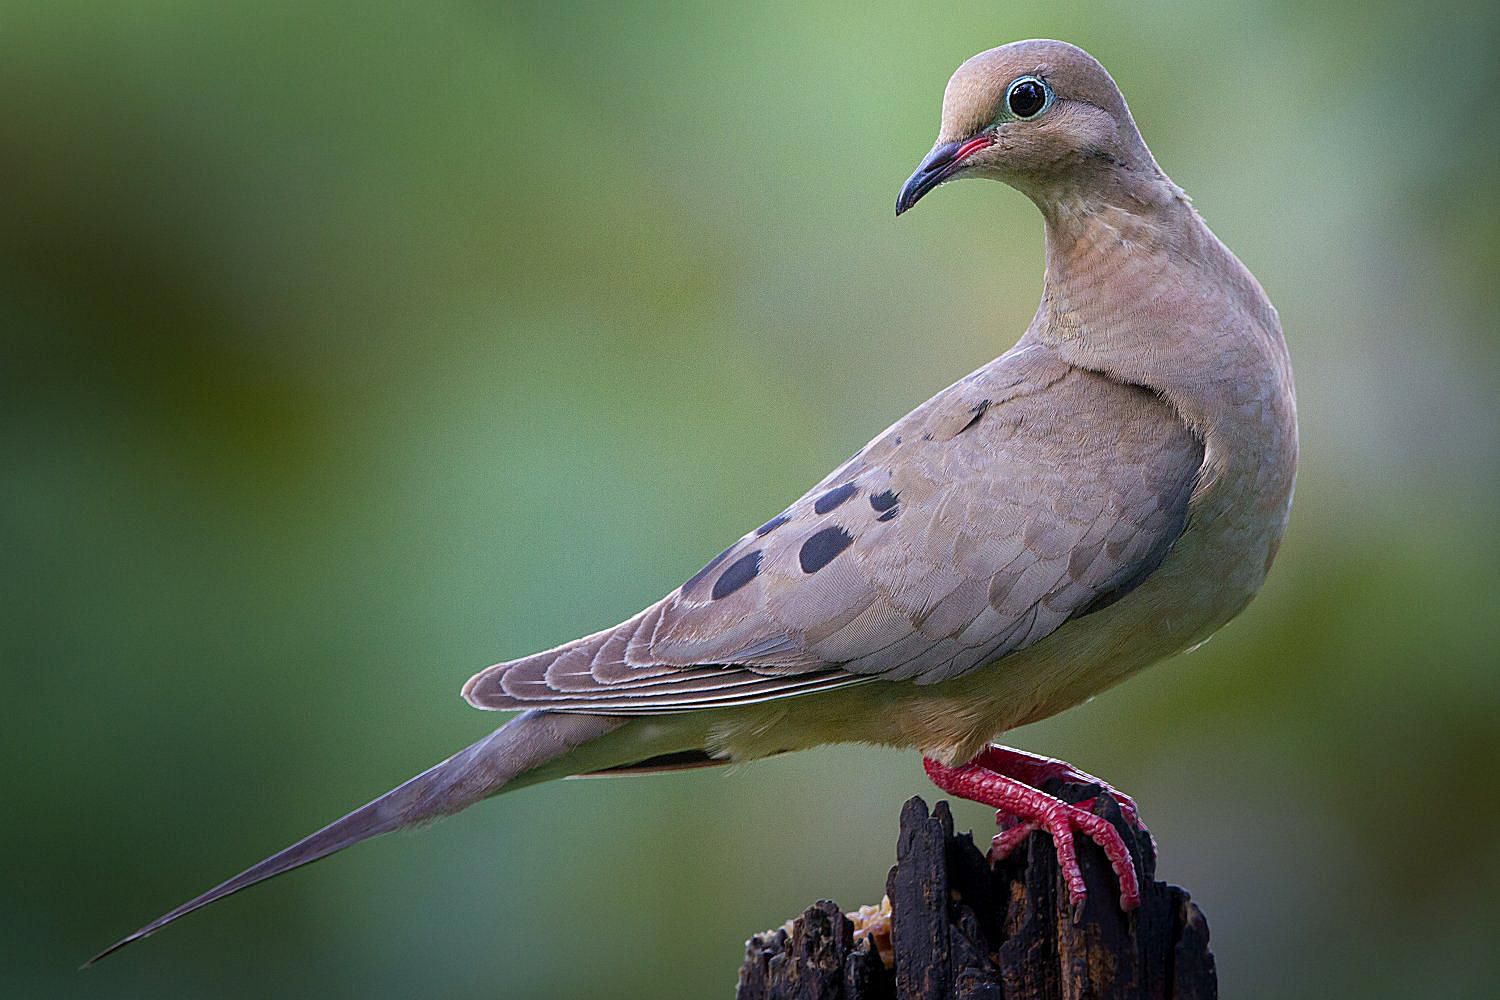 mourning dove 58a6daf65f9b58a3c9161352